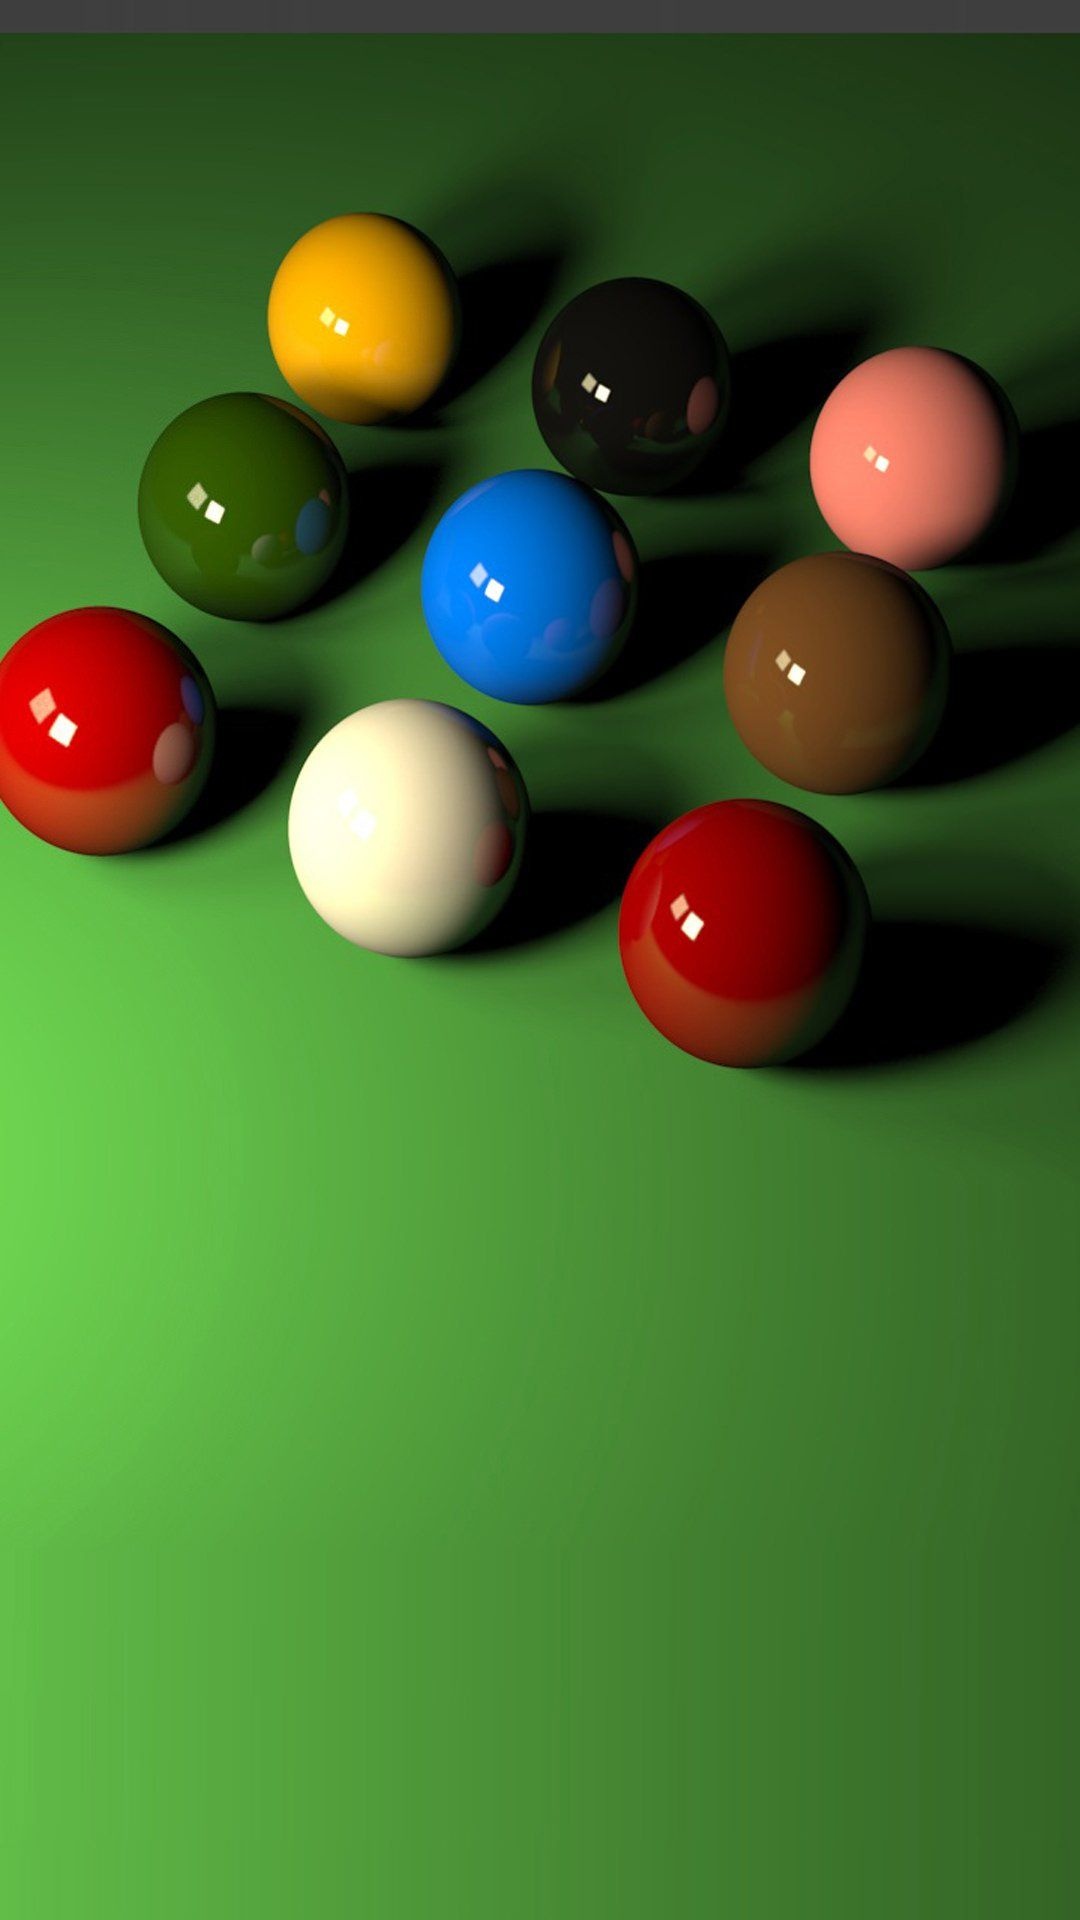 Snooker: The balls for a classic English cue game - reds, color balls and a white cue ball. 1080x1920 Full HD Wallpaper.